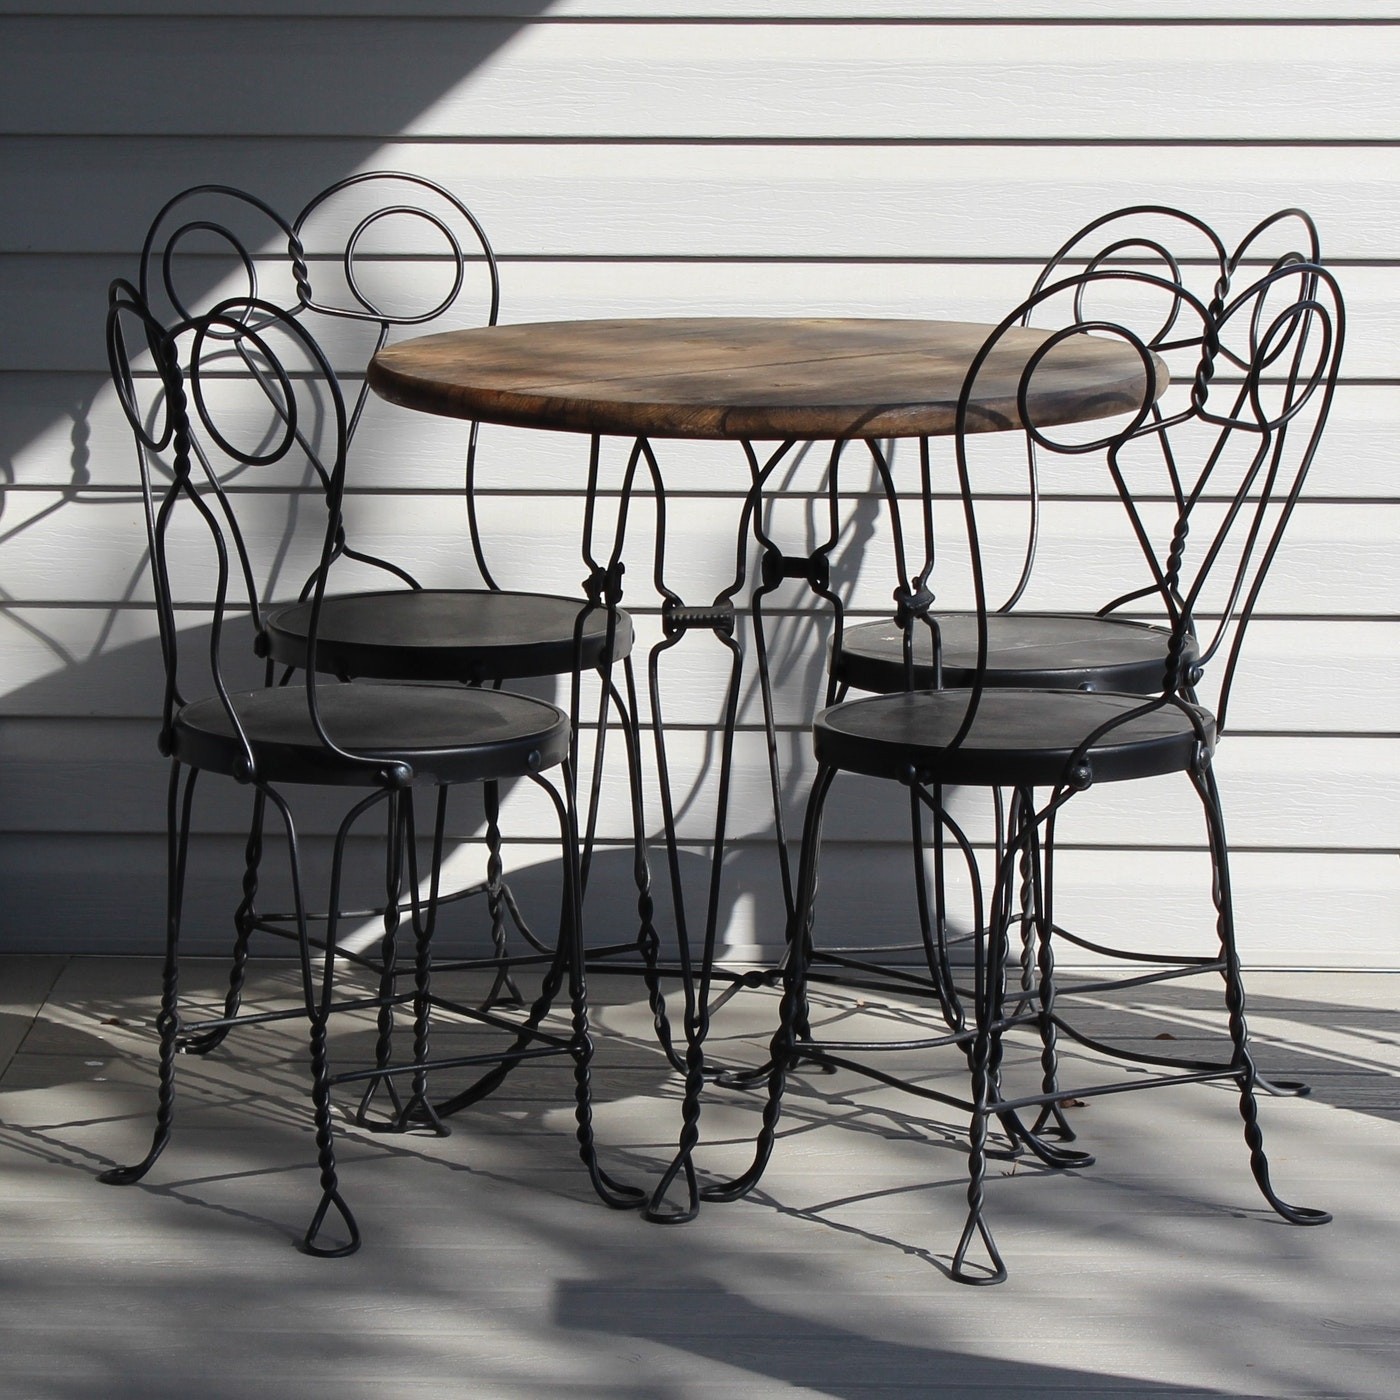 Vintage wrought iron soda shop table and chairs ebth 3